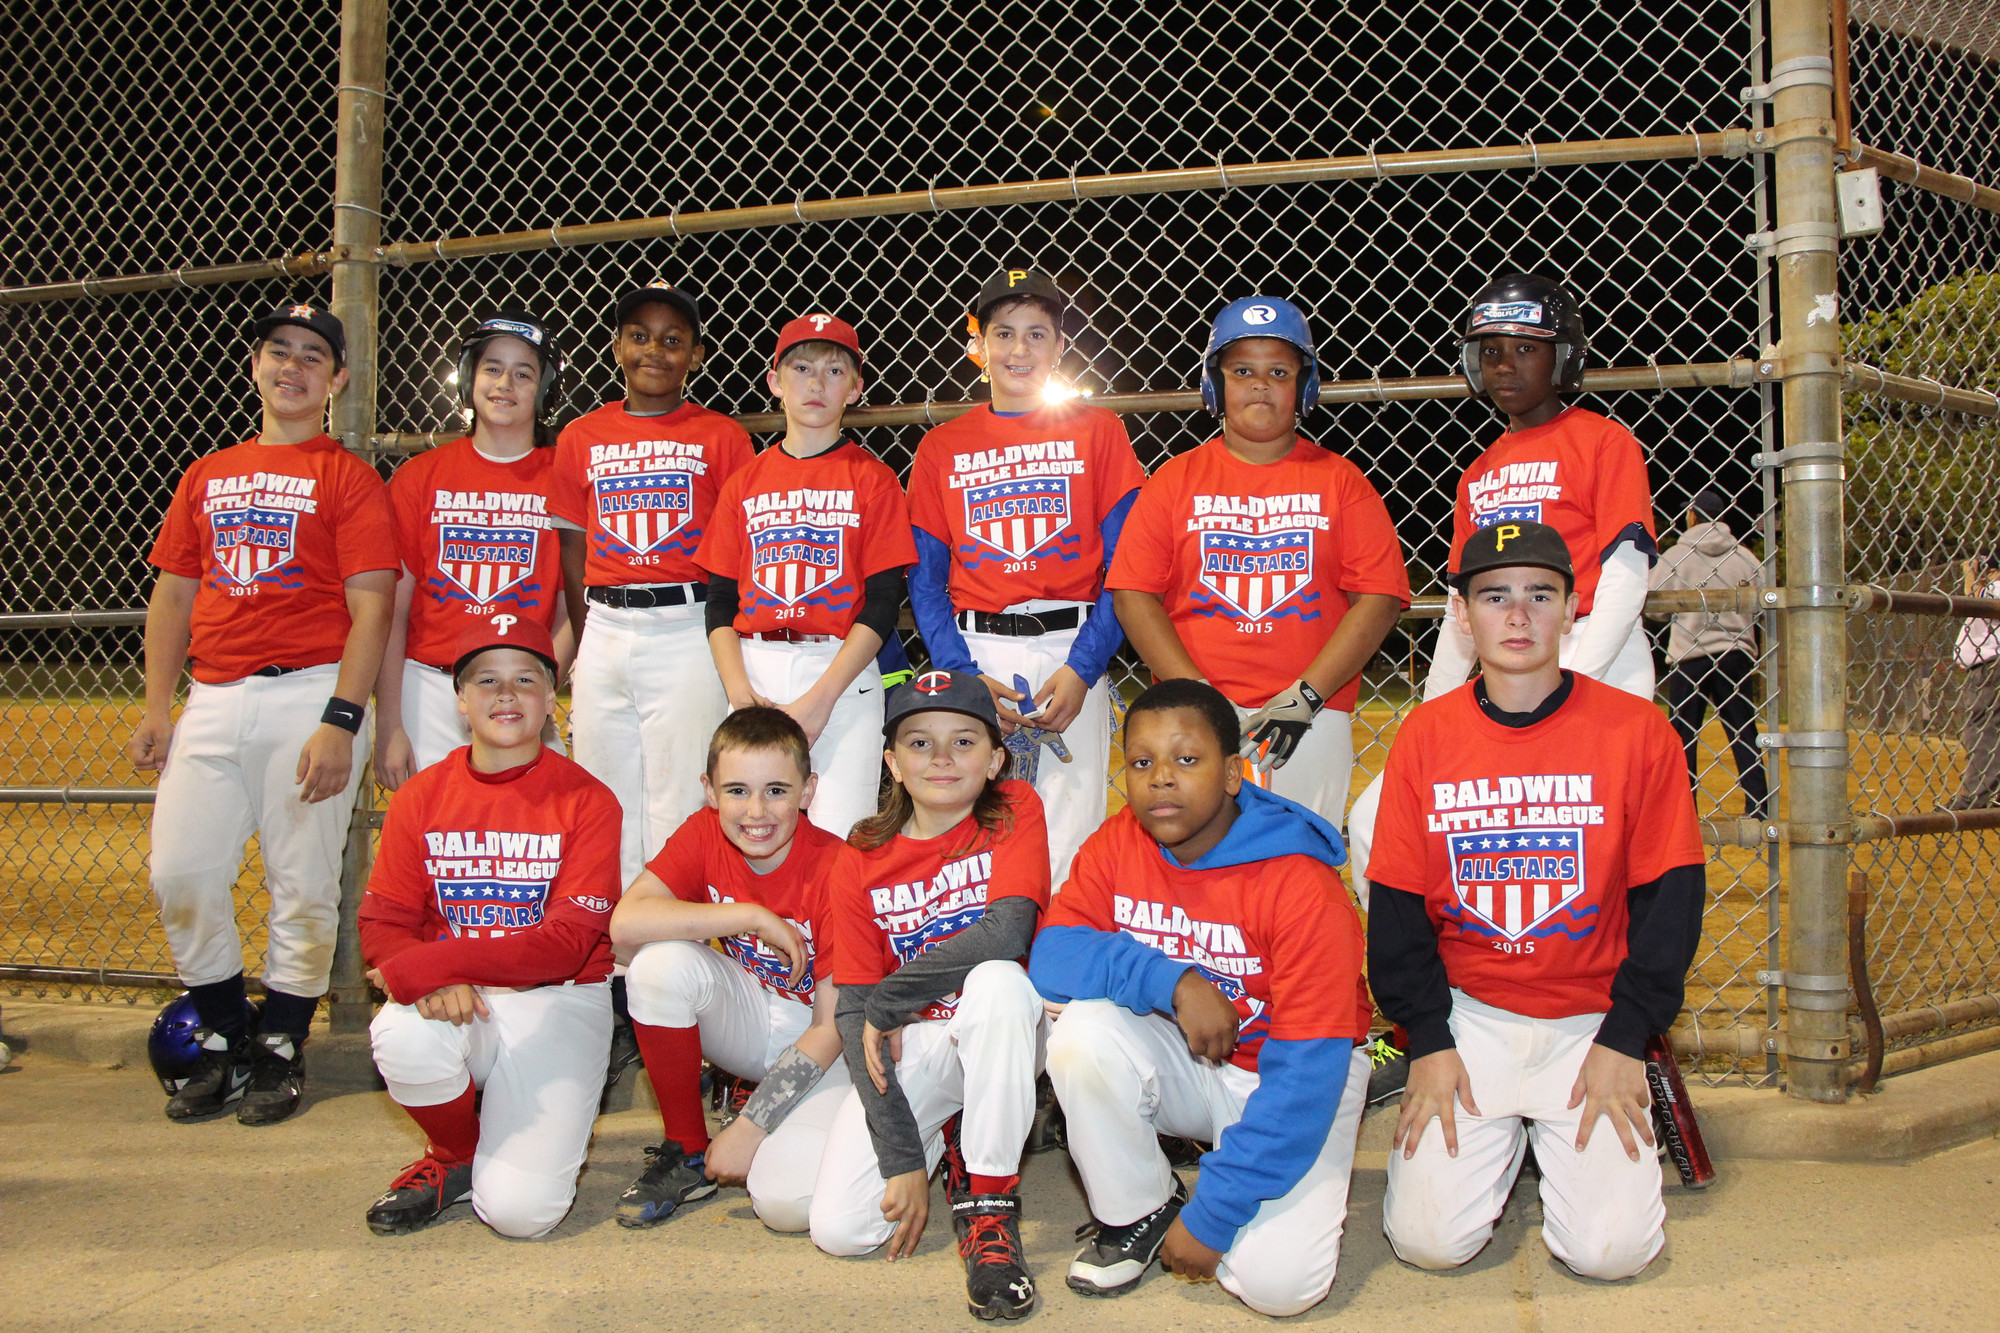 The red team made up of 11 and 12-year-old all-stars had representatives from each of the league’s teams.